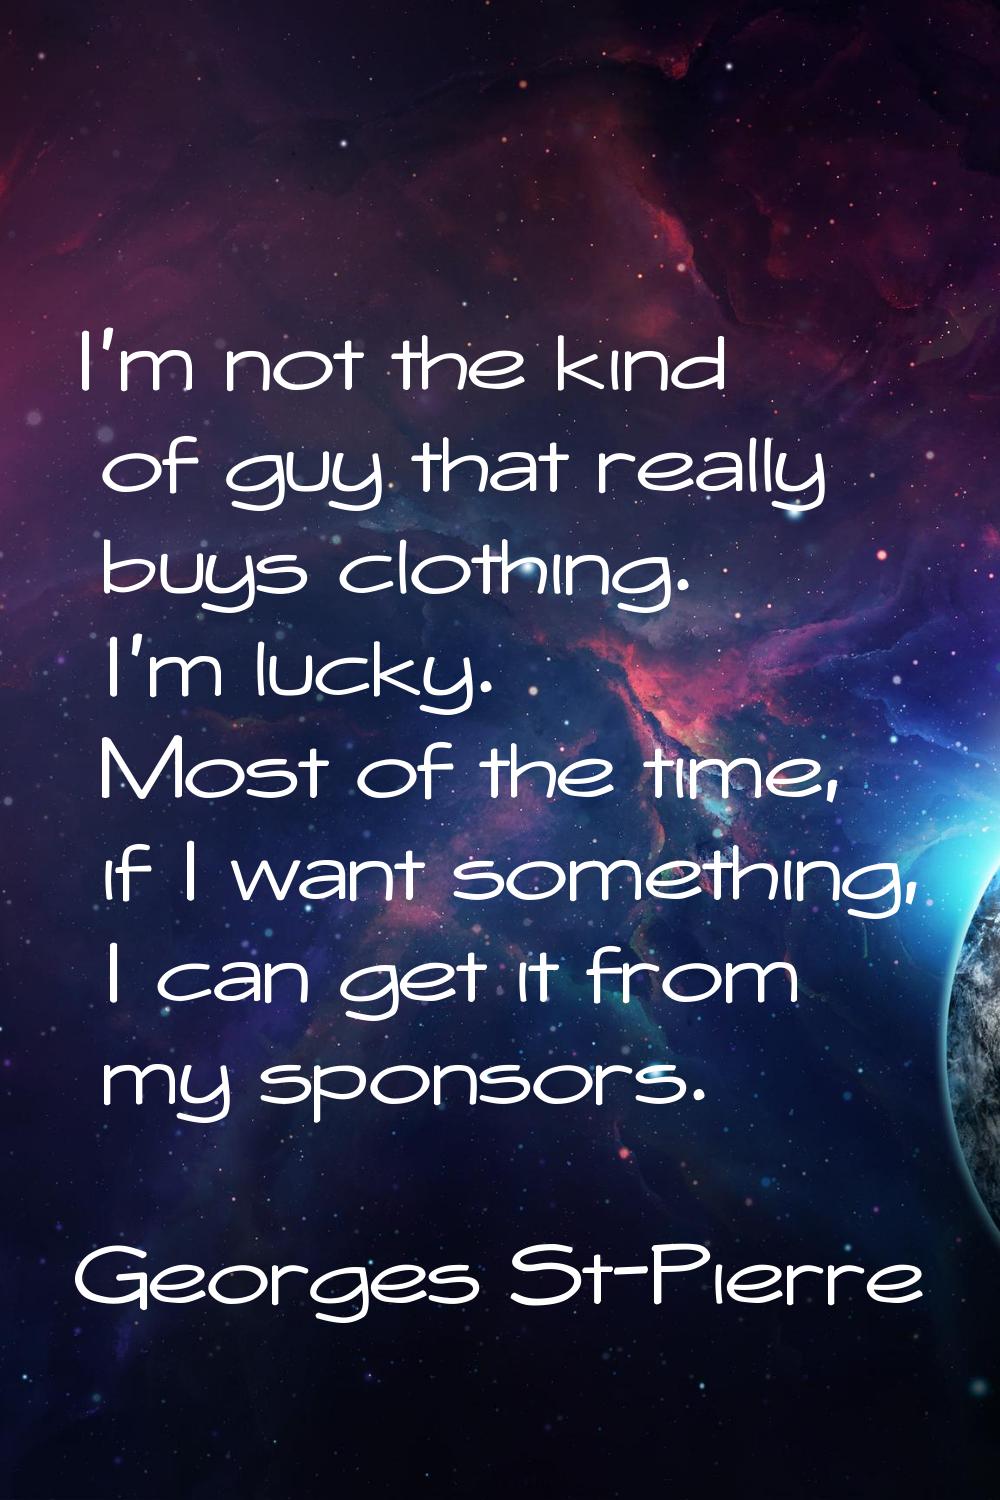 I'm not the kind of guy that really buys clothing. I'm lucky. Most of the time, if I want something